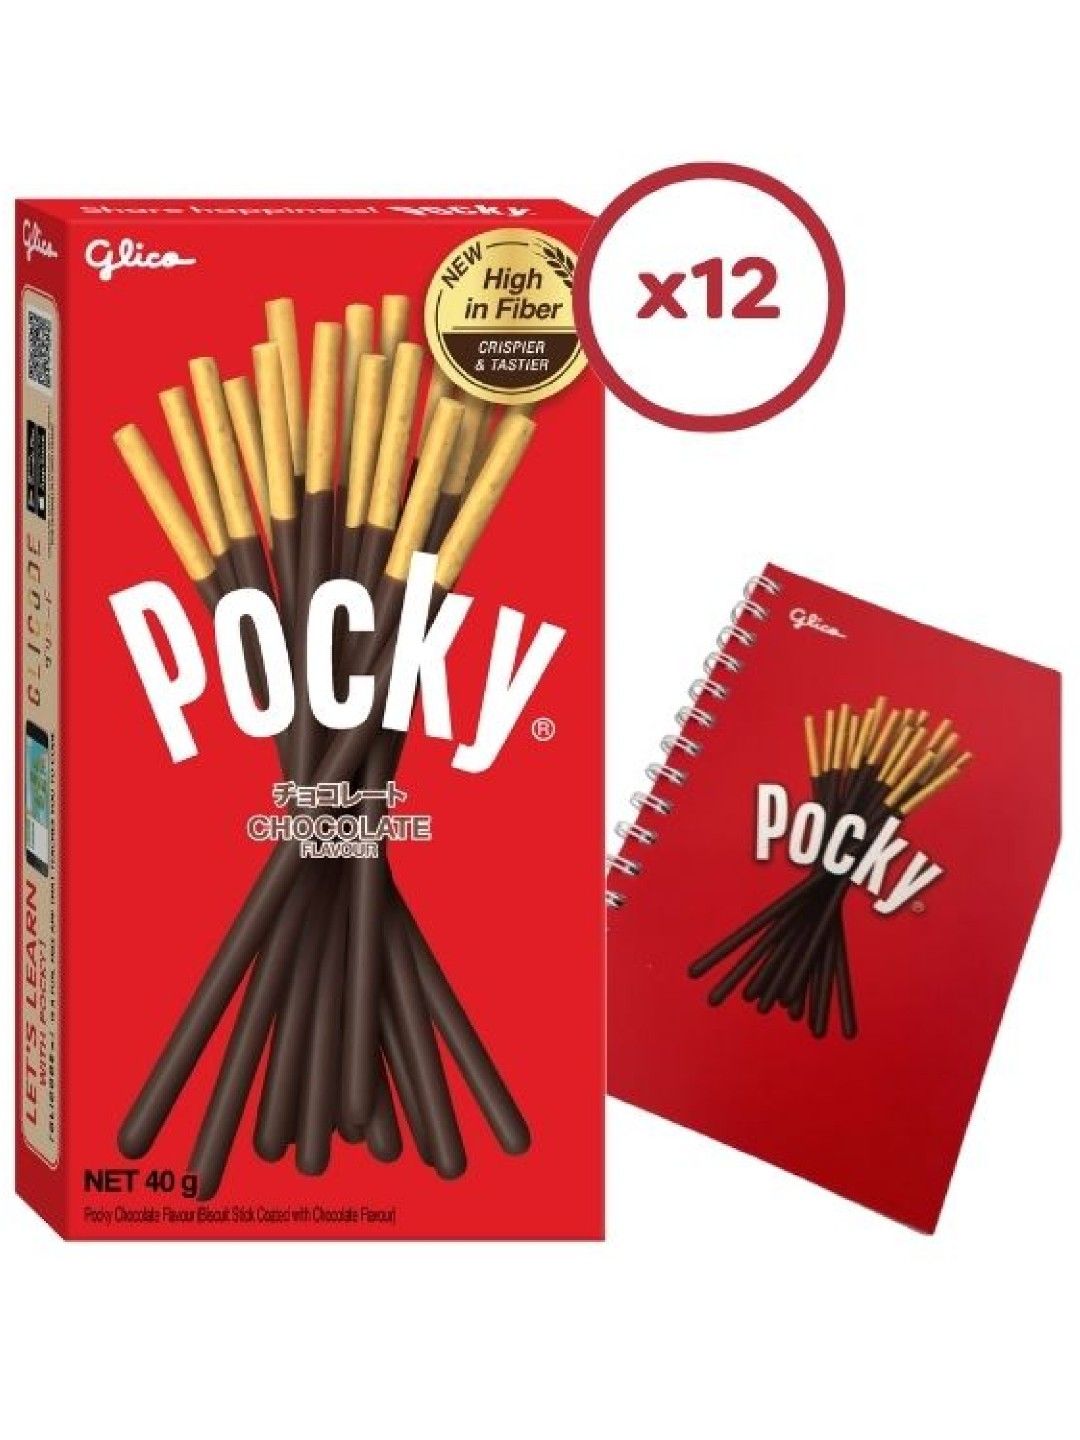 Pocky Chocolate Biscuit Sticks (Bundle of 12) with FREE Glico Notebook (No Color- Image 1)